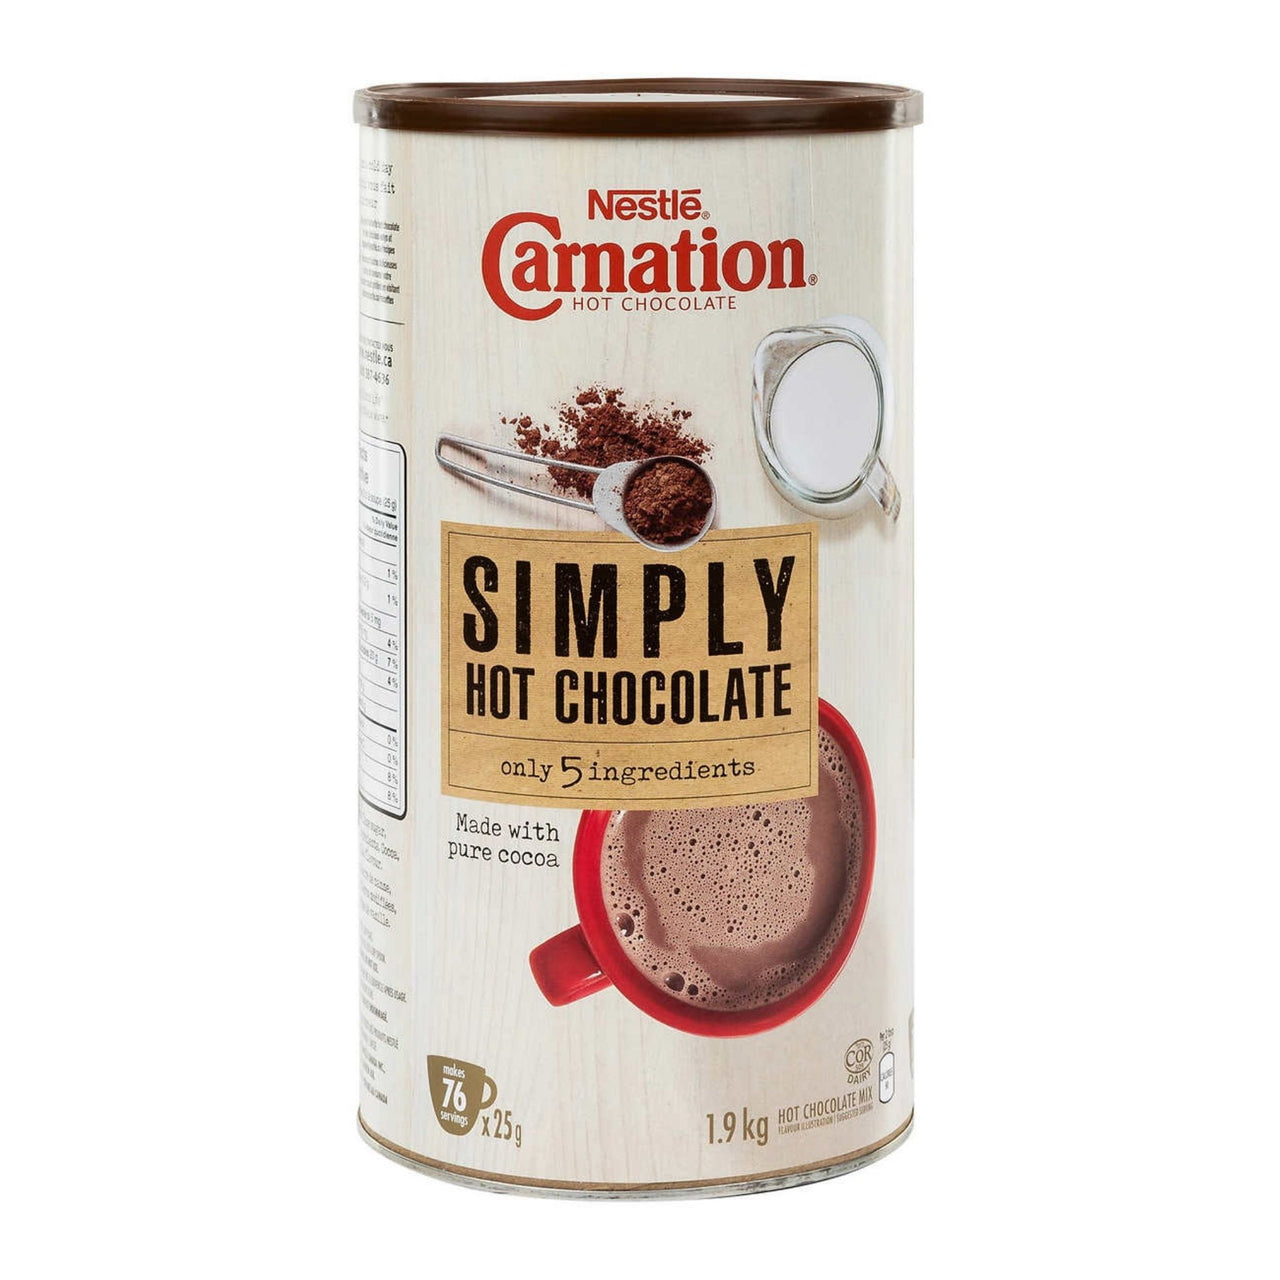 Image of Carnation Simply Hot Chocolate, 1.9 kg